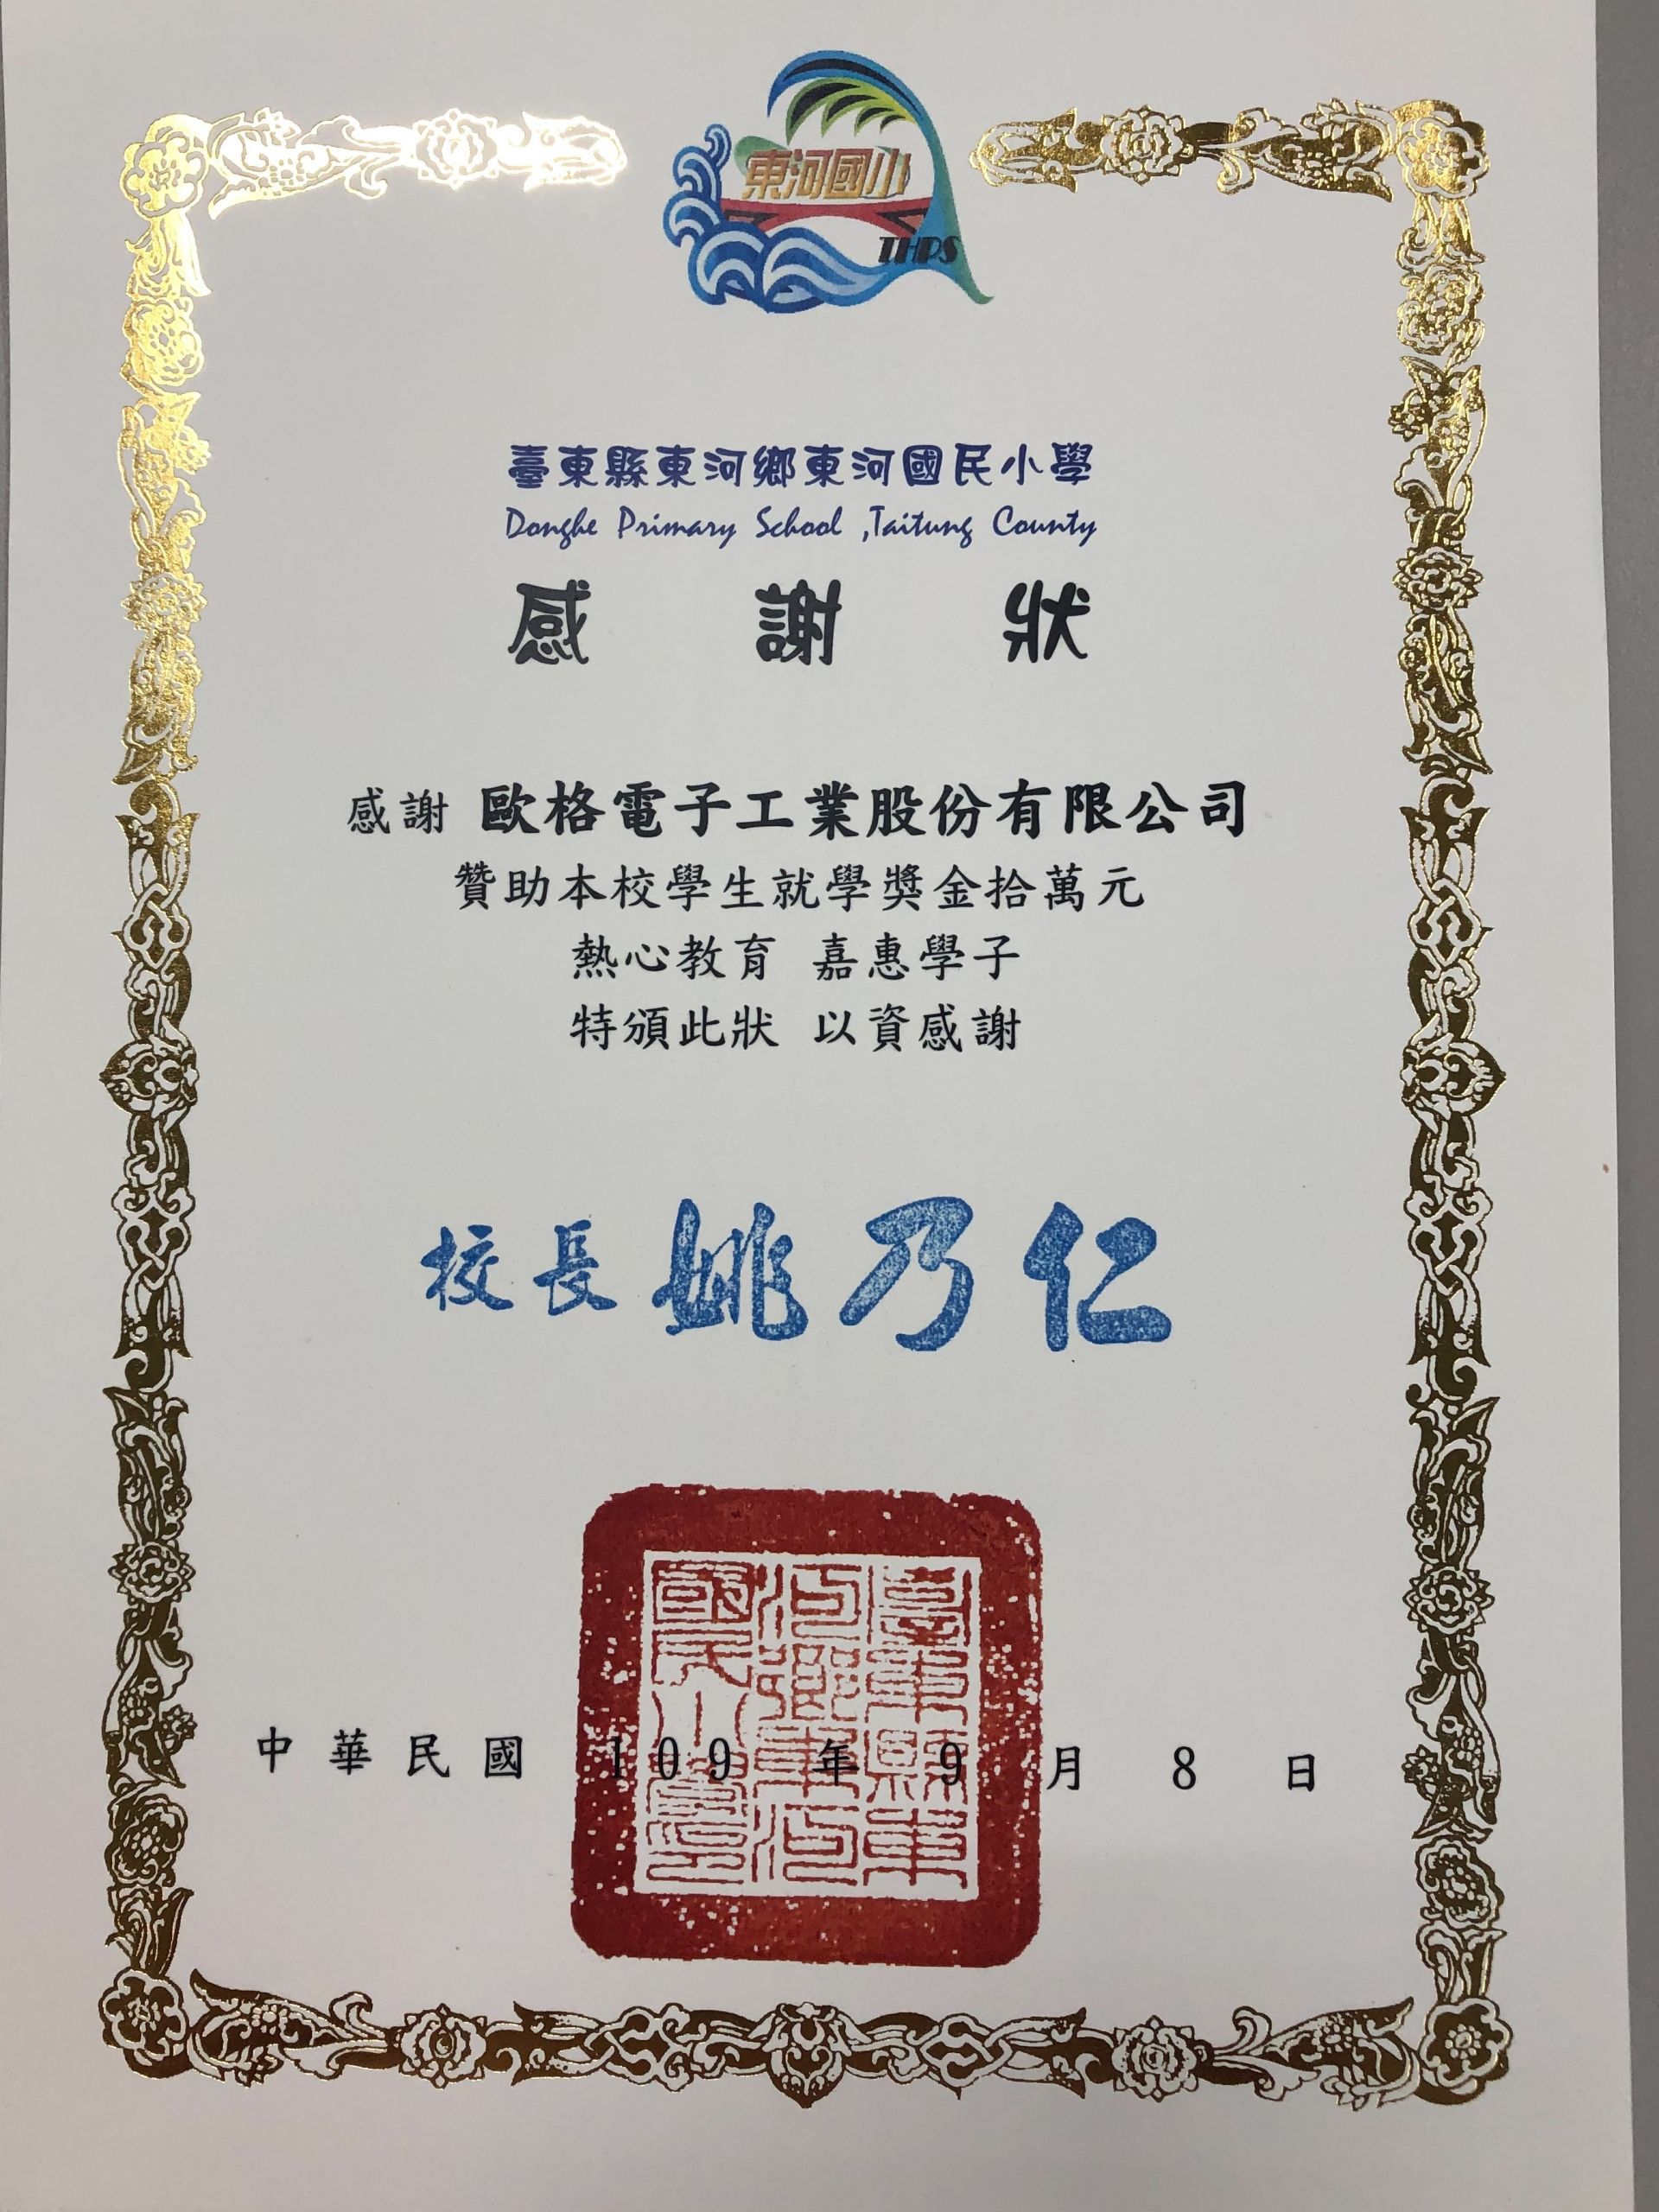 AHOKU awarded the 2020 Certificate of Scholarship’s Appreciation from Donghe Primary School